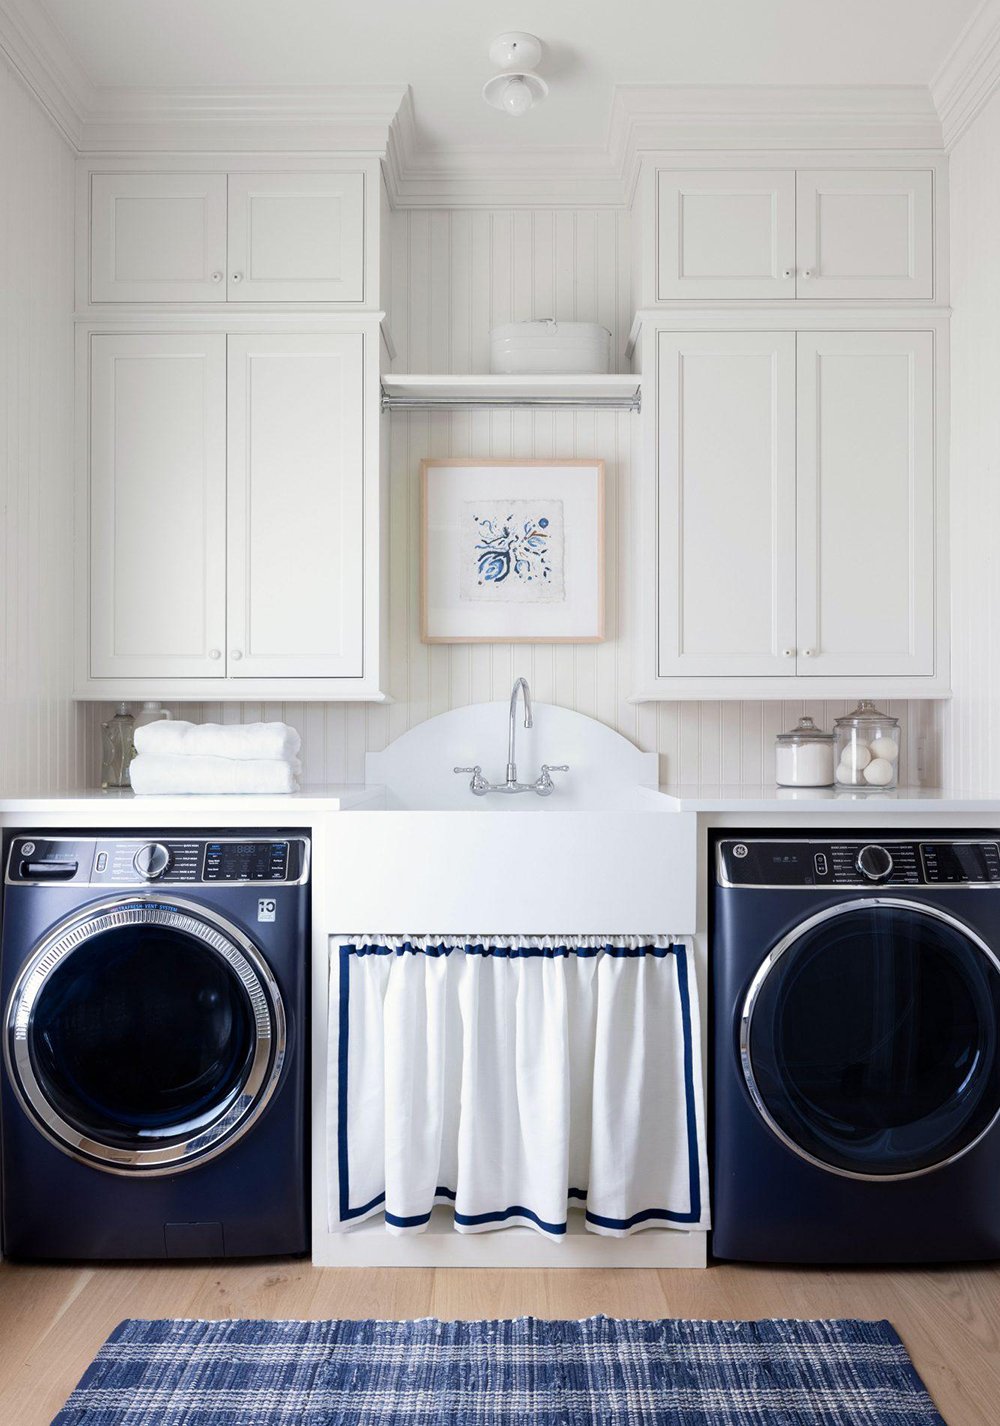 10 Pins : Laundry Room Edition - roomfortuesday.com